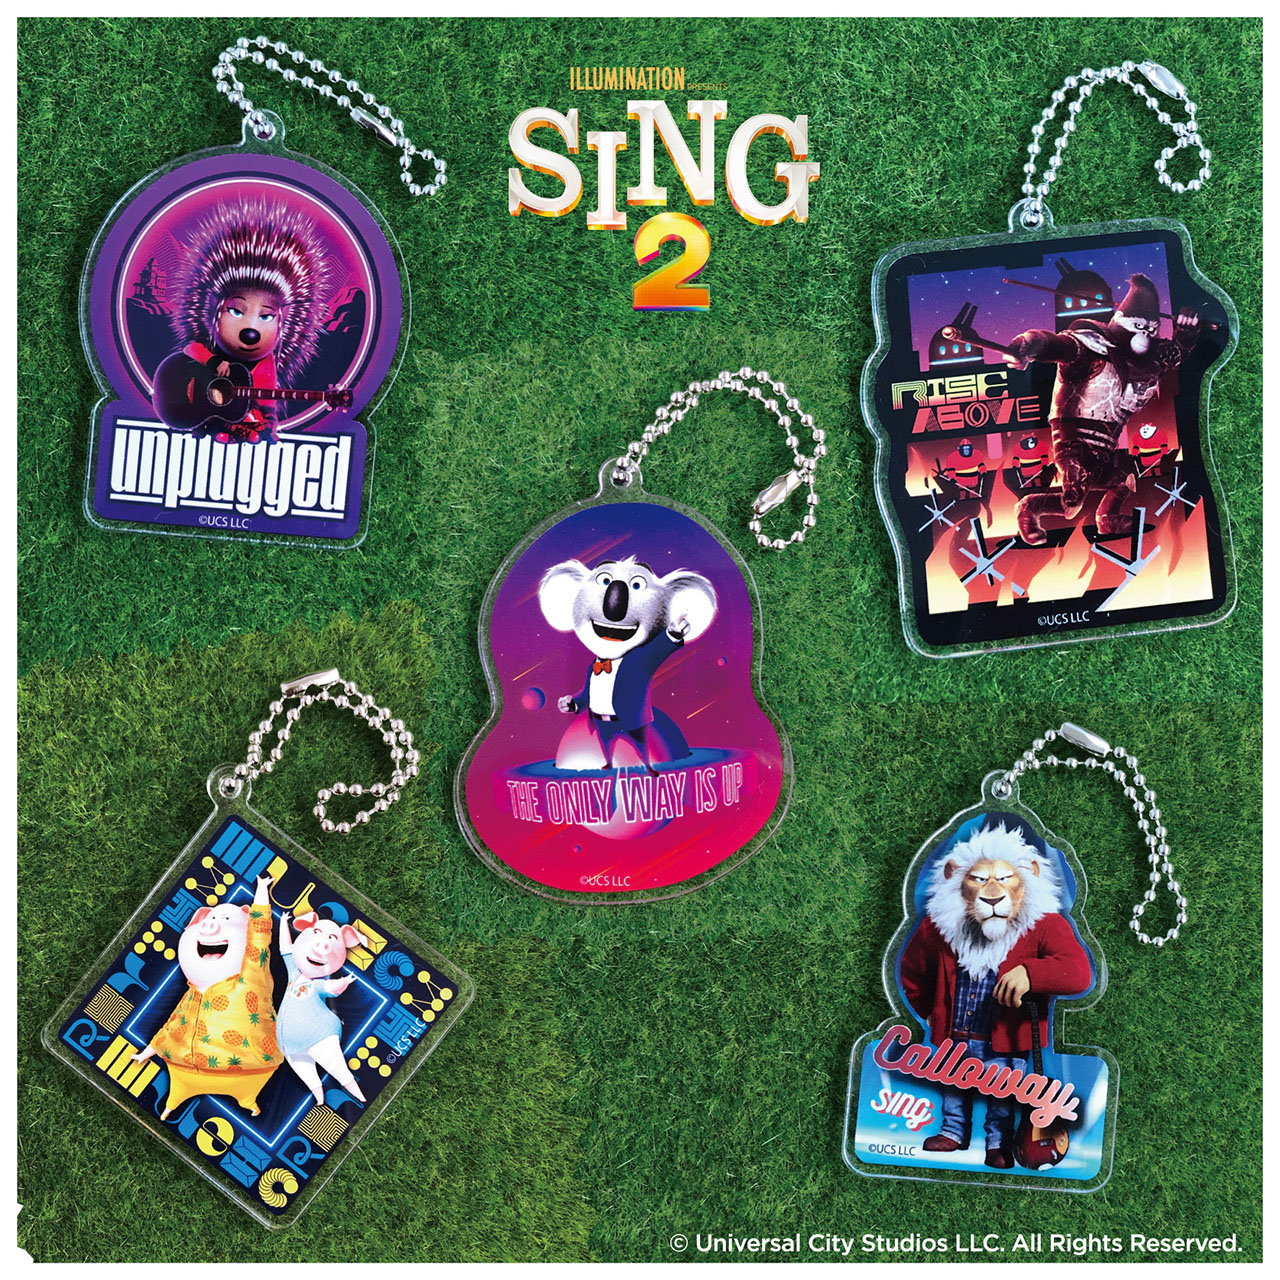 SING2　アクリルキーチェーンクレイ柄　再入荷が決定✨